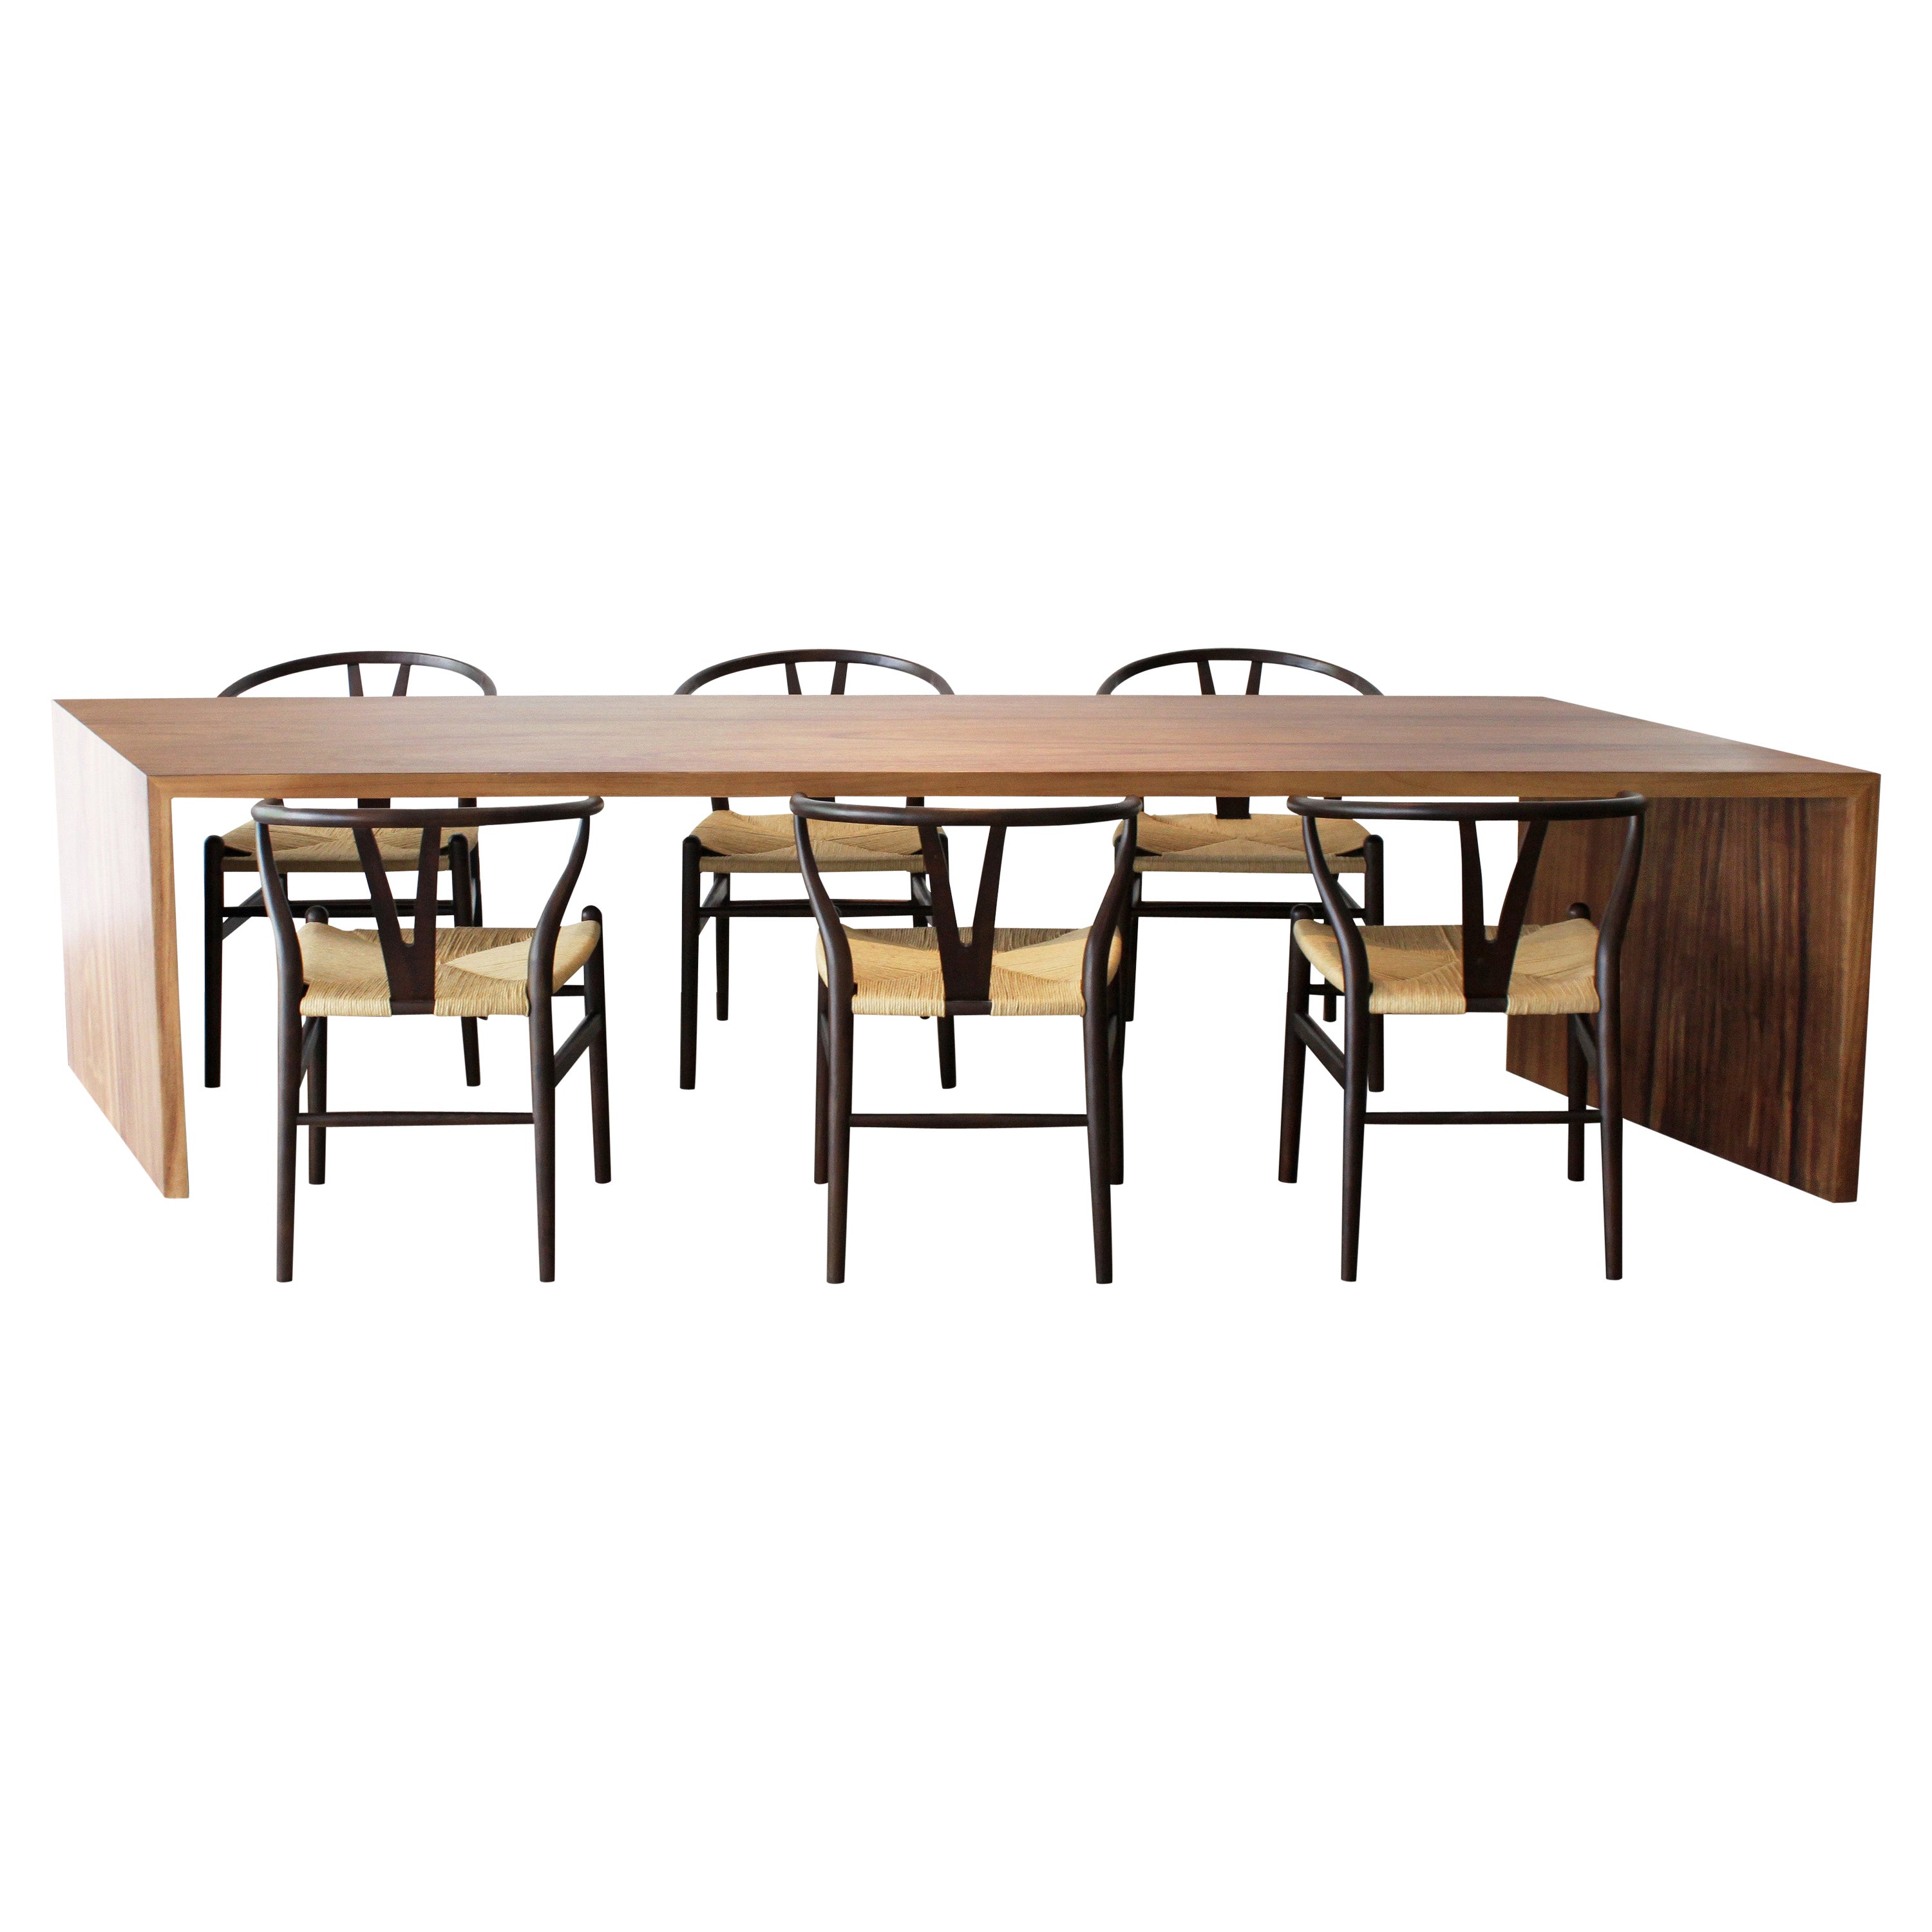 La Desviada Tall Table and Desk by Maria Beckmann, Represented by Tuleste Factor